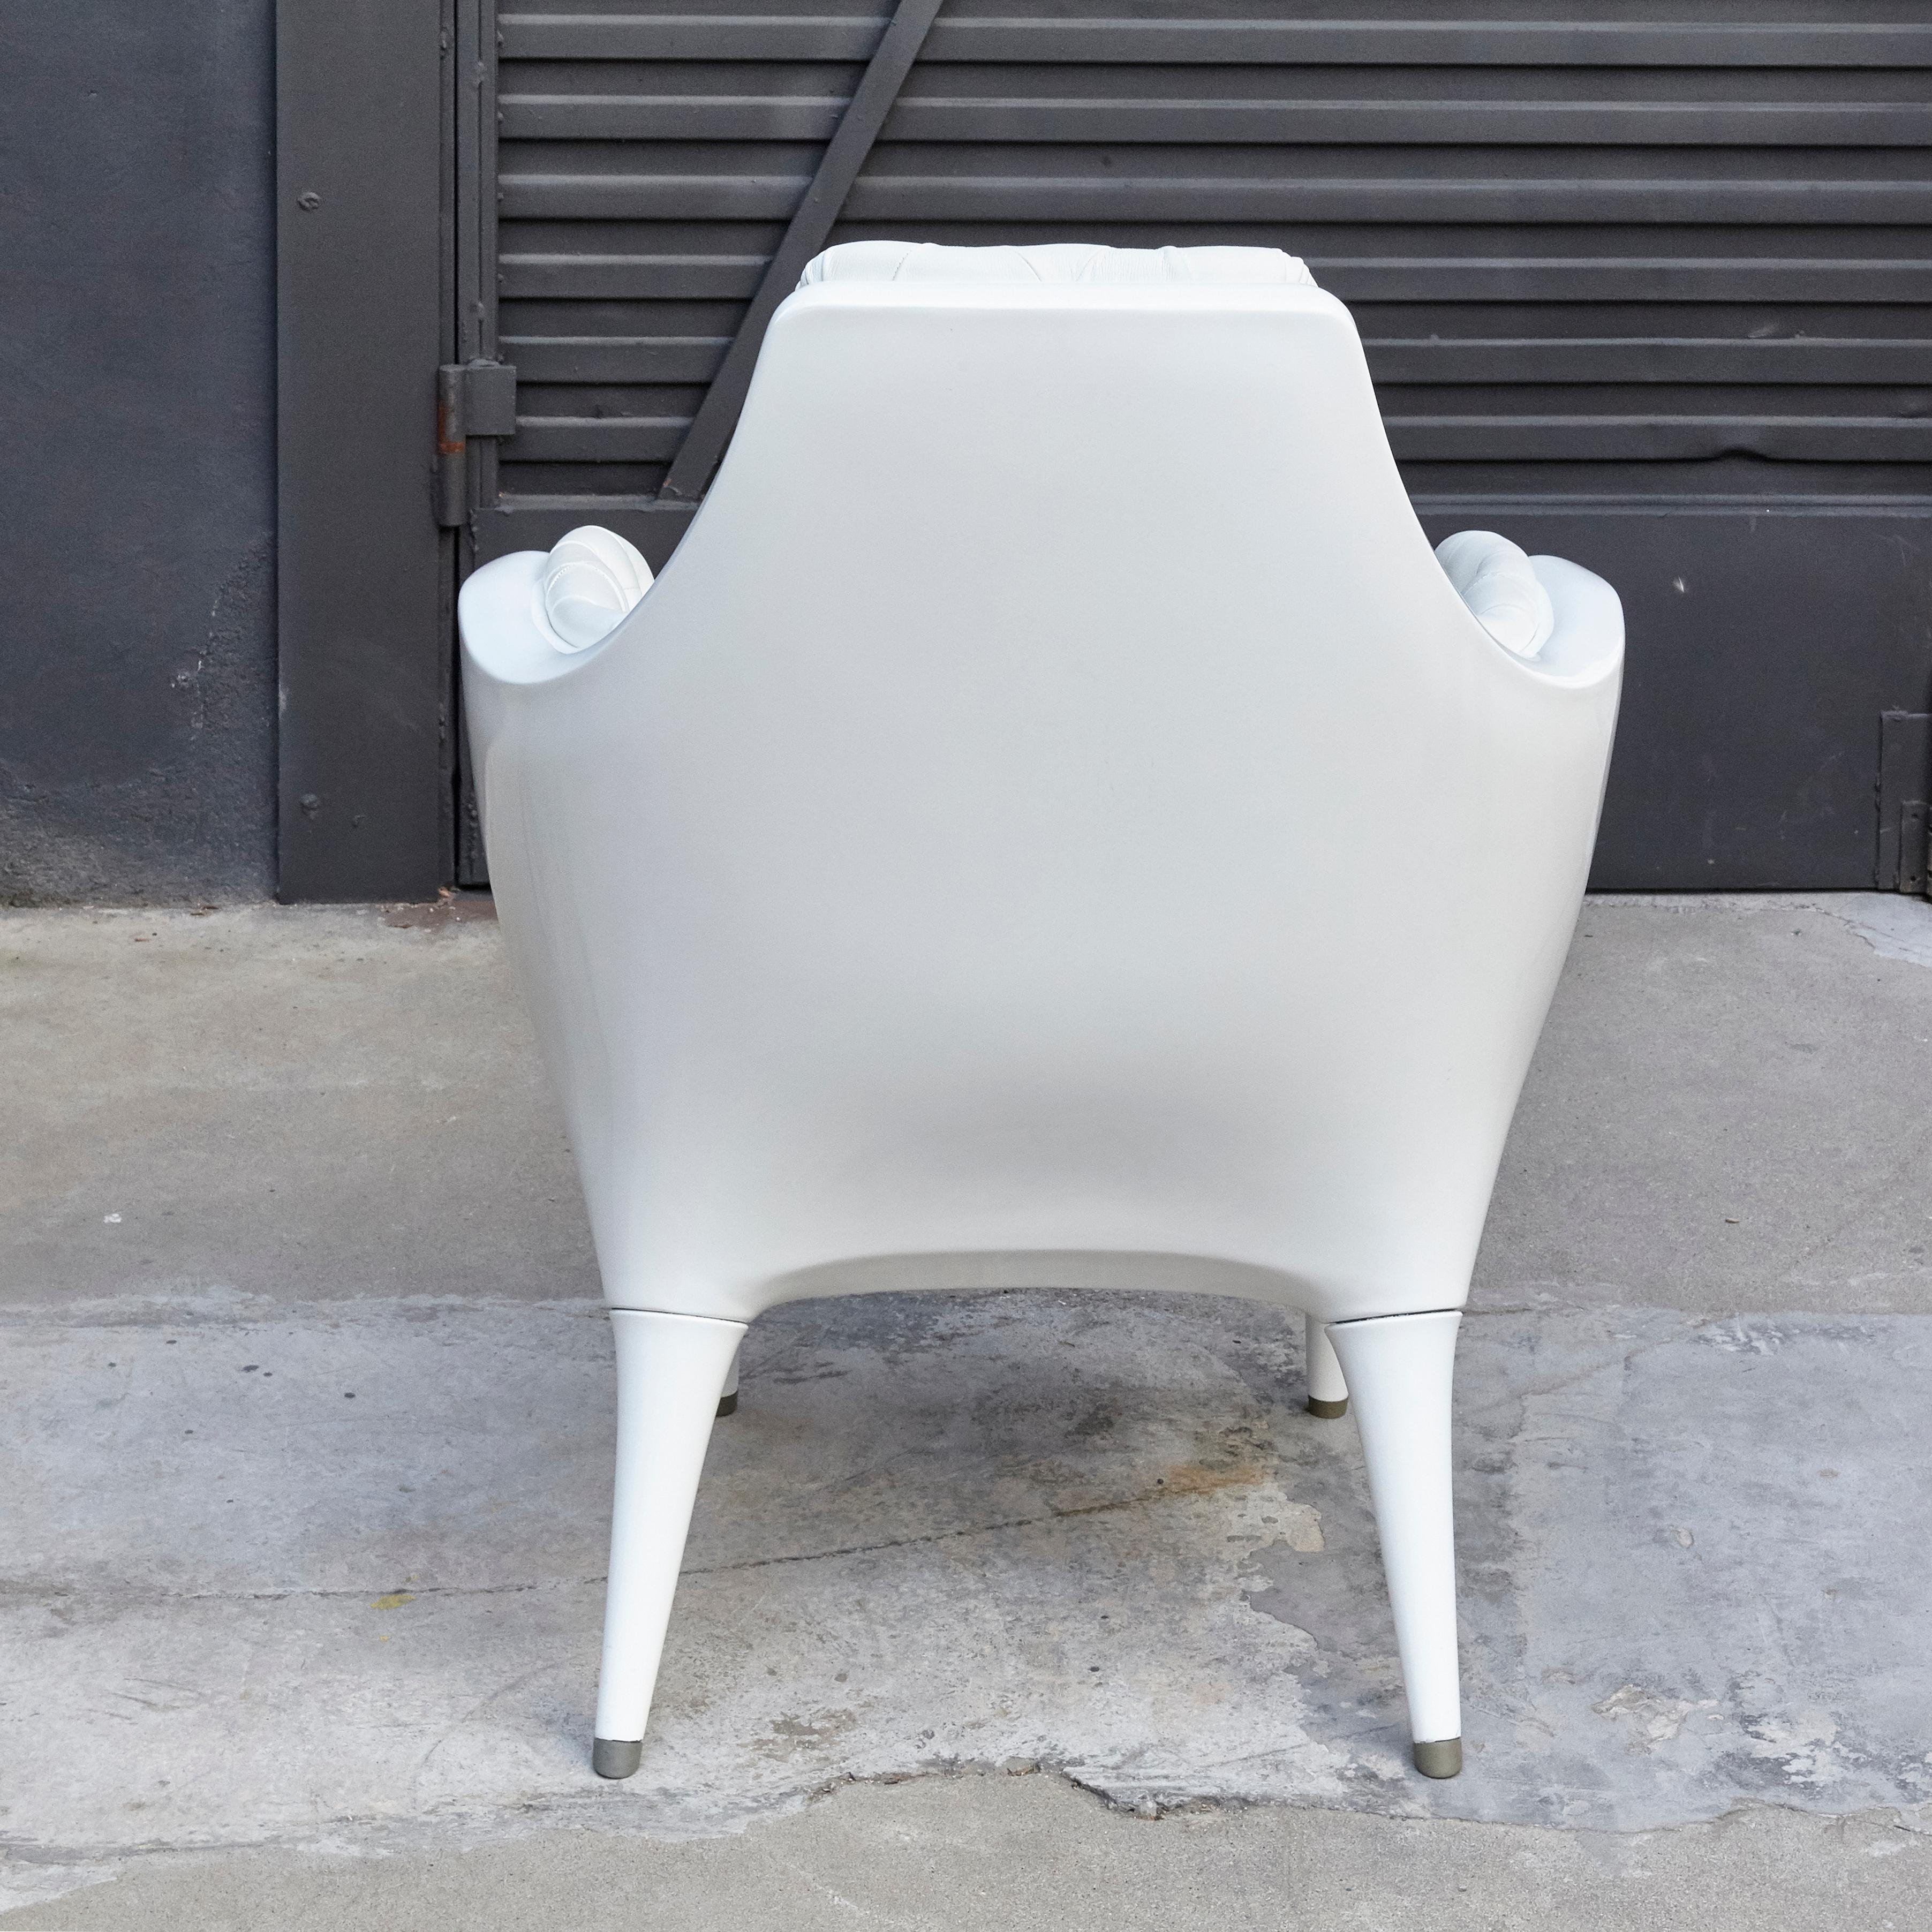 Upholstery White Jaime Hayon Contemporary Showtime Armchair Lacquered